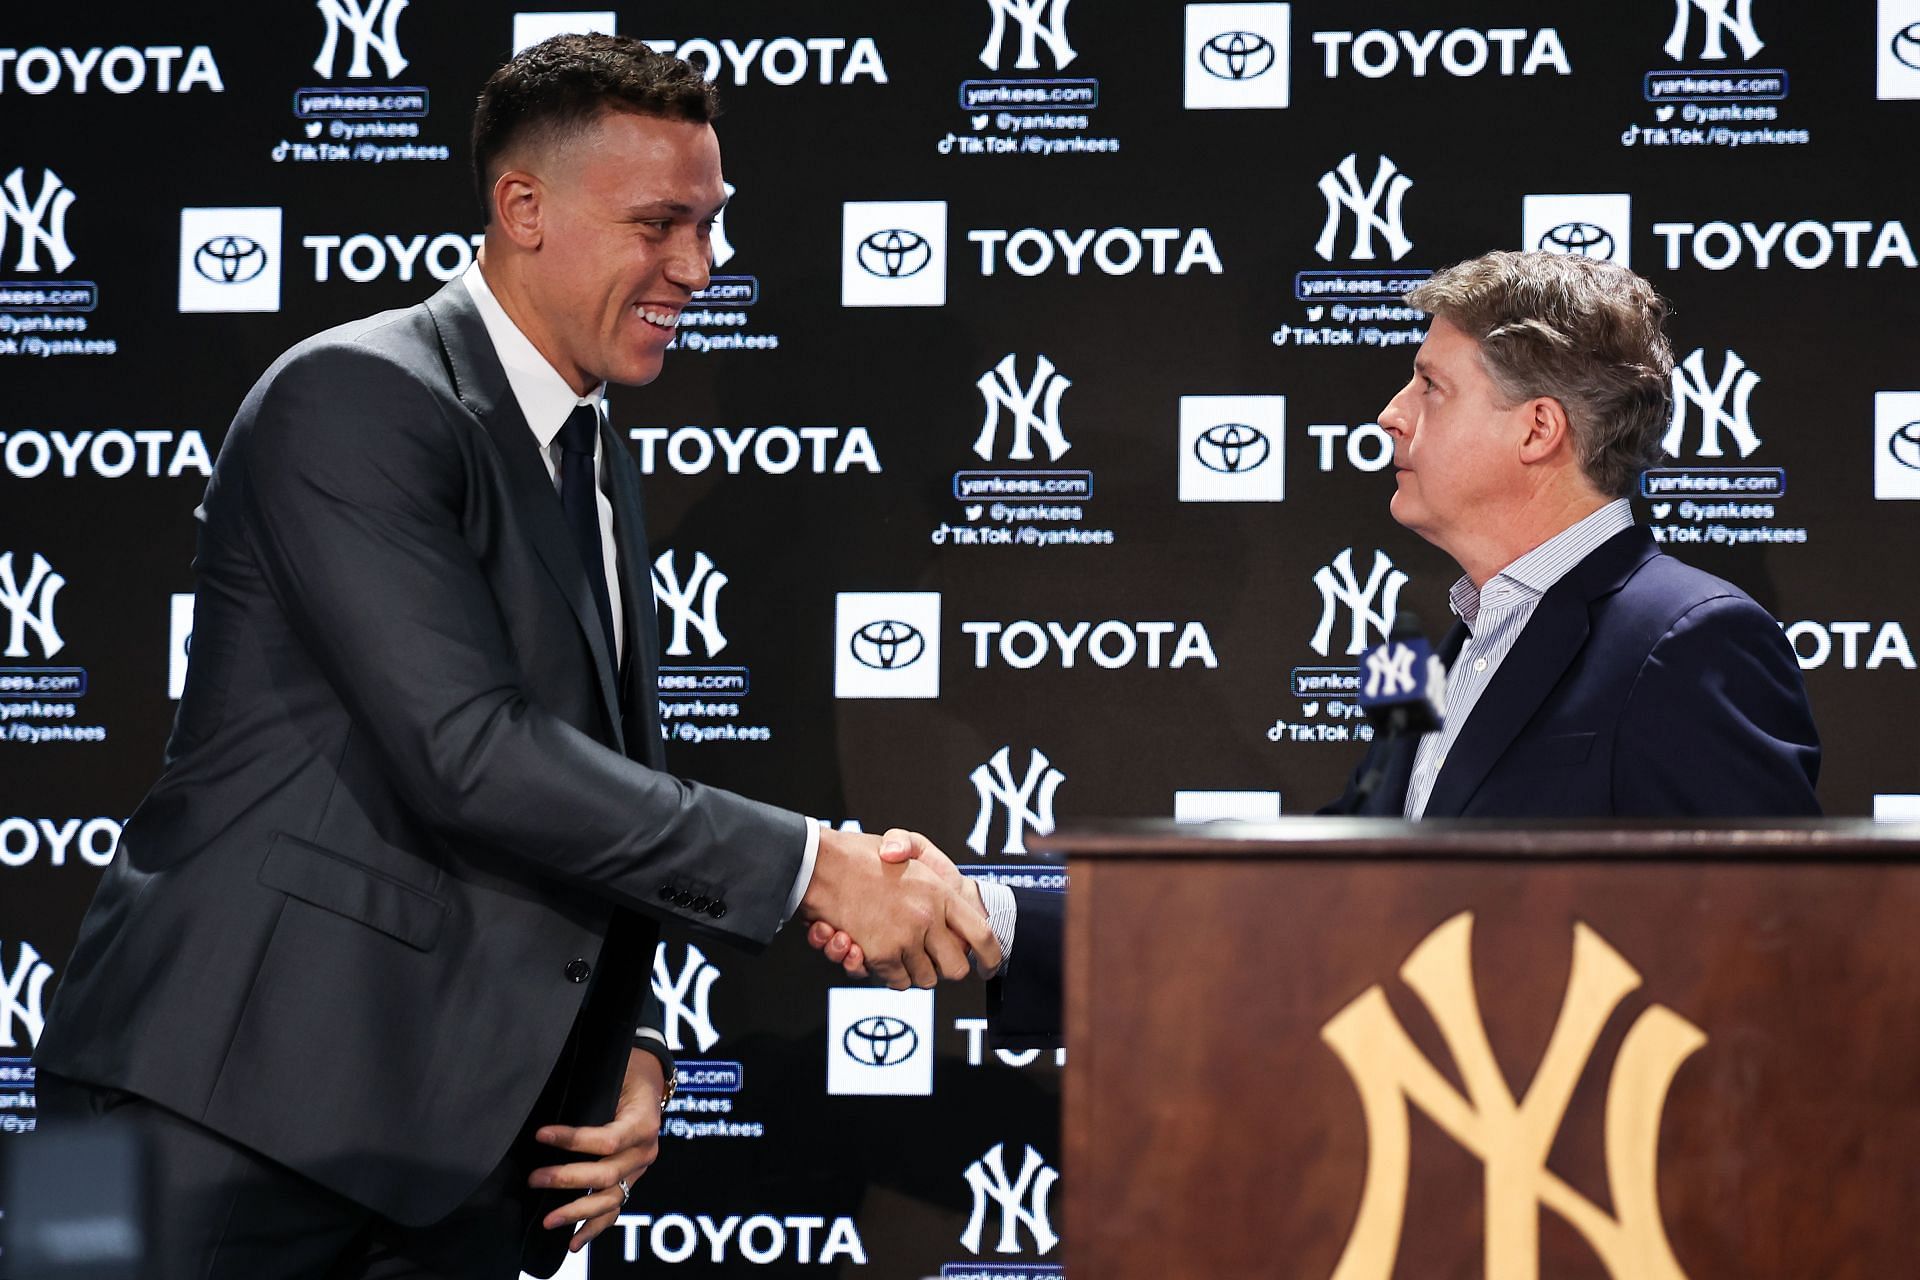 Yankees principal owner Hal Steinbrenner greets Aaron Judge #99 of the New York Yankees during a press conference at Yankee Stadium on December 21, 2022